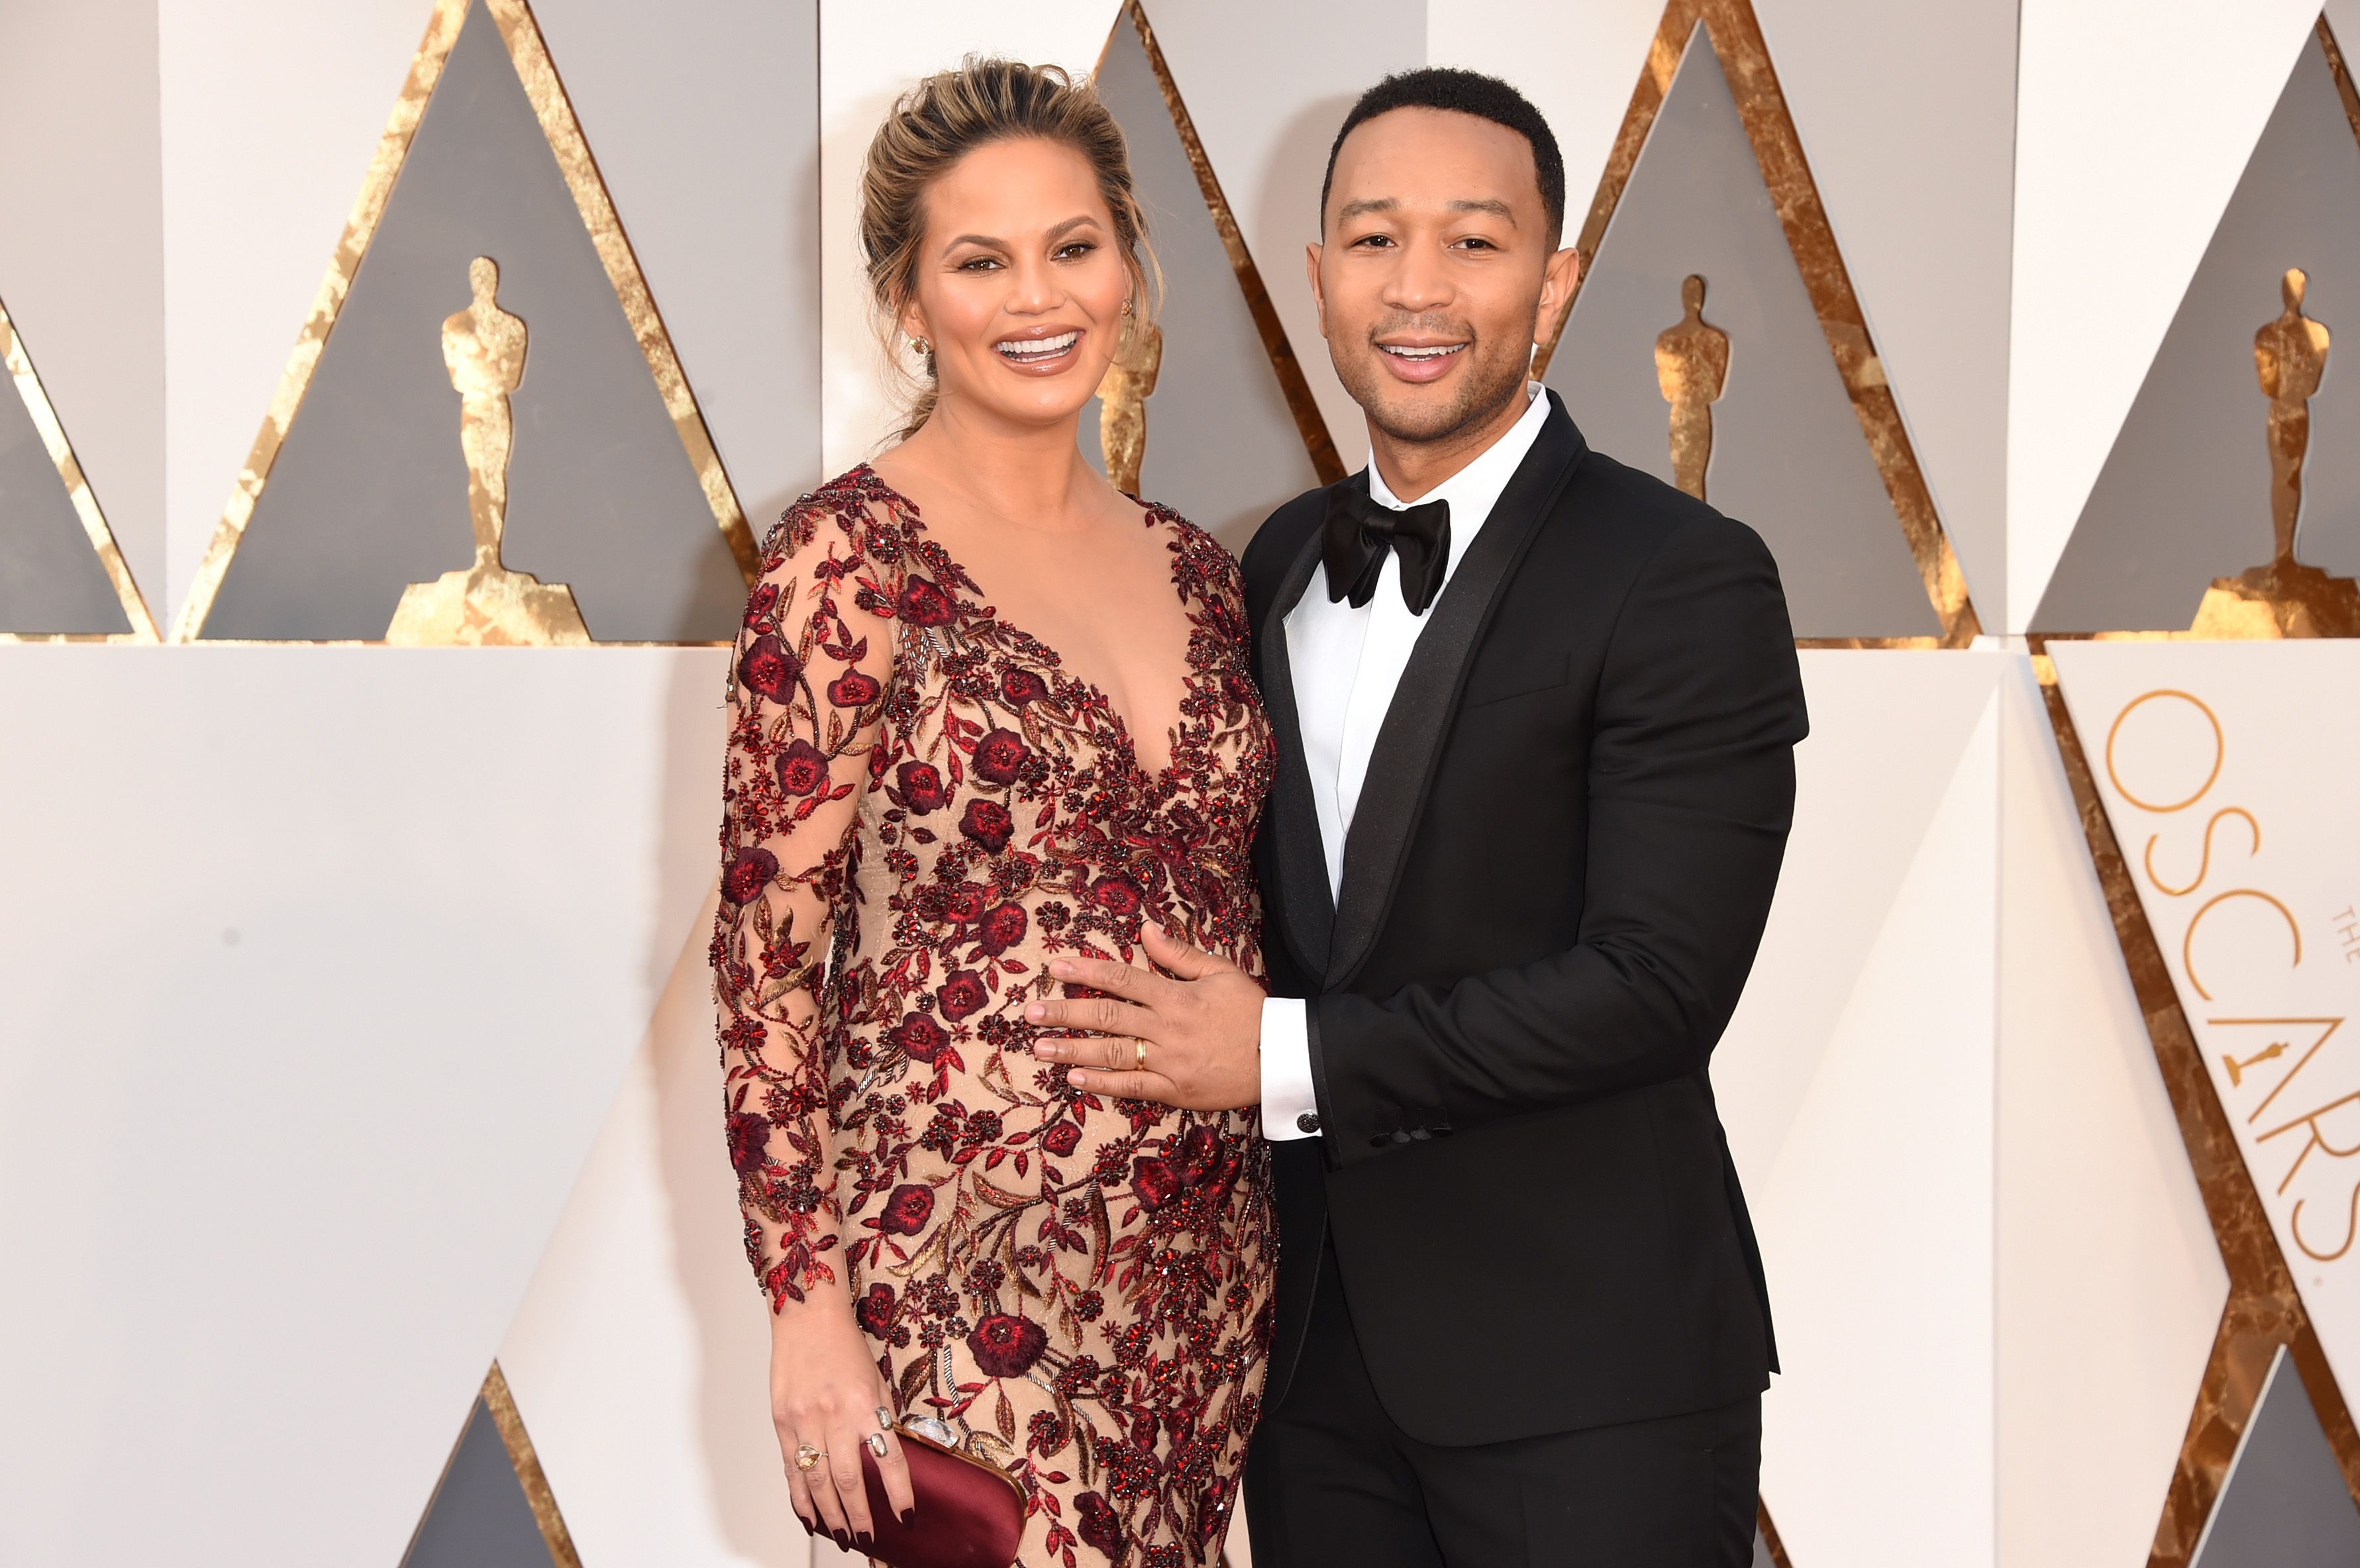  Chrissy Teigen and John Legend at the 88th Annual Academy Awards in 2016 in Hollywood, California | Source: Getty Images